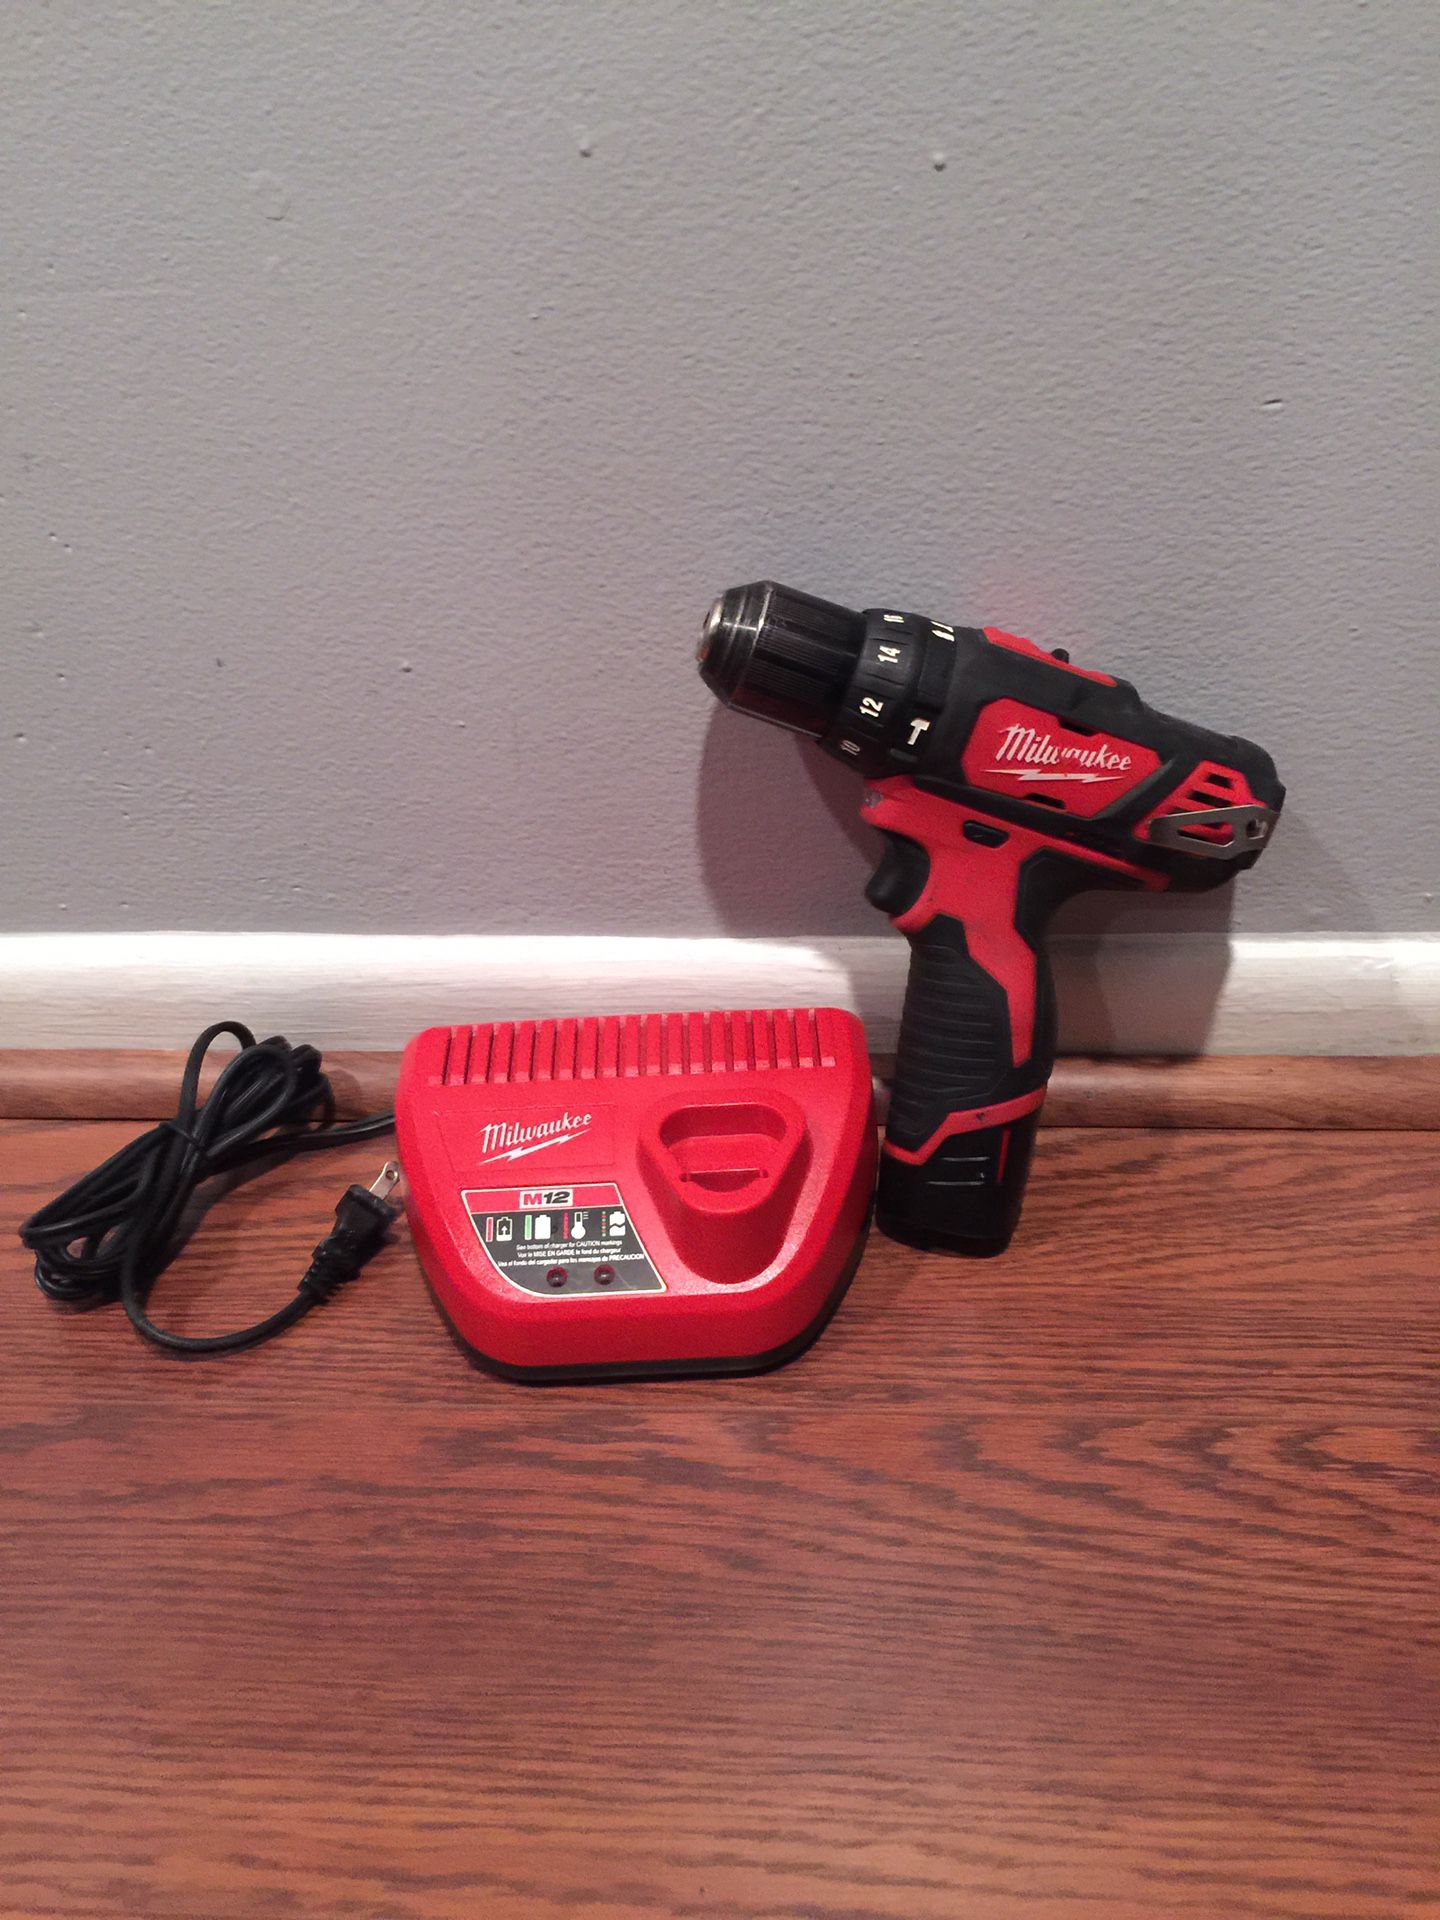 MILWAUKEE 12V VOLT HAMMER DRILL DRIVER, BATTERY & CHARGER, WORKS GREAT..